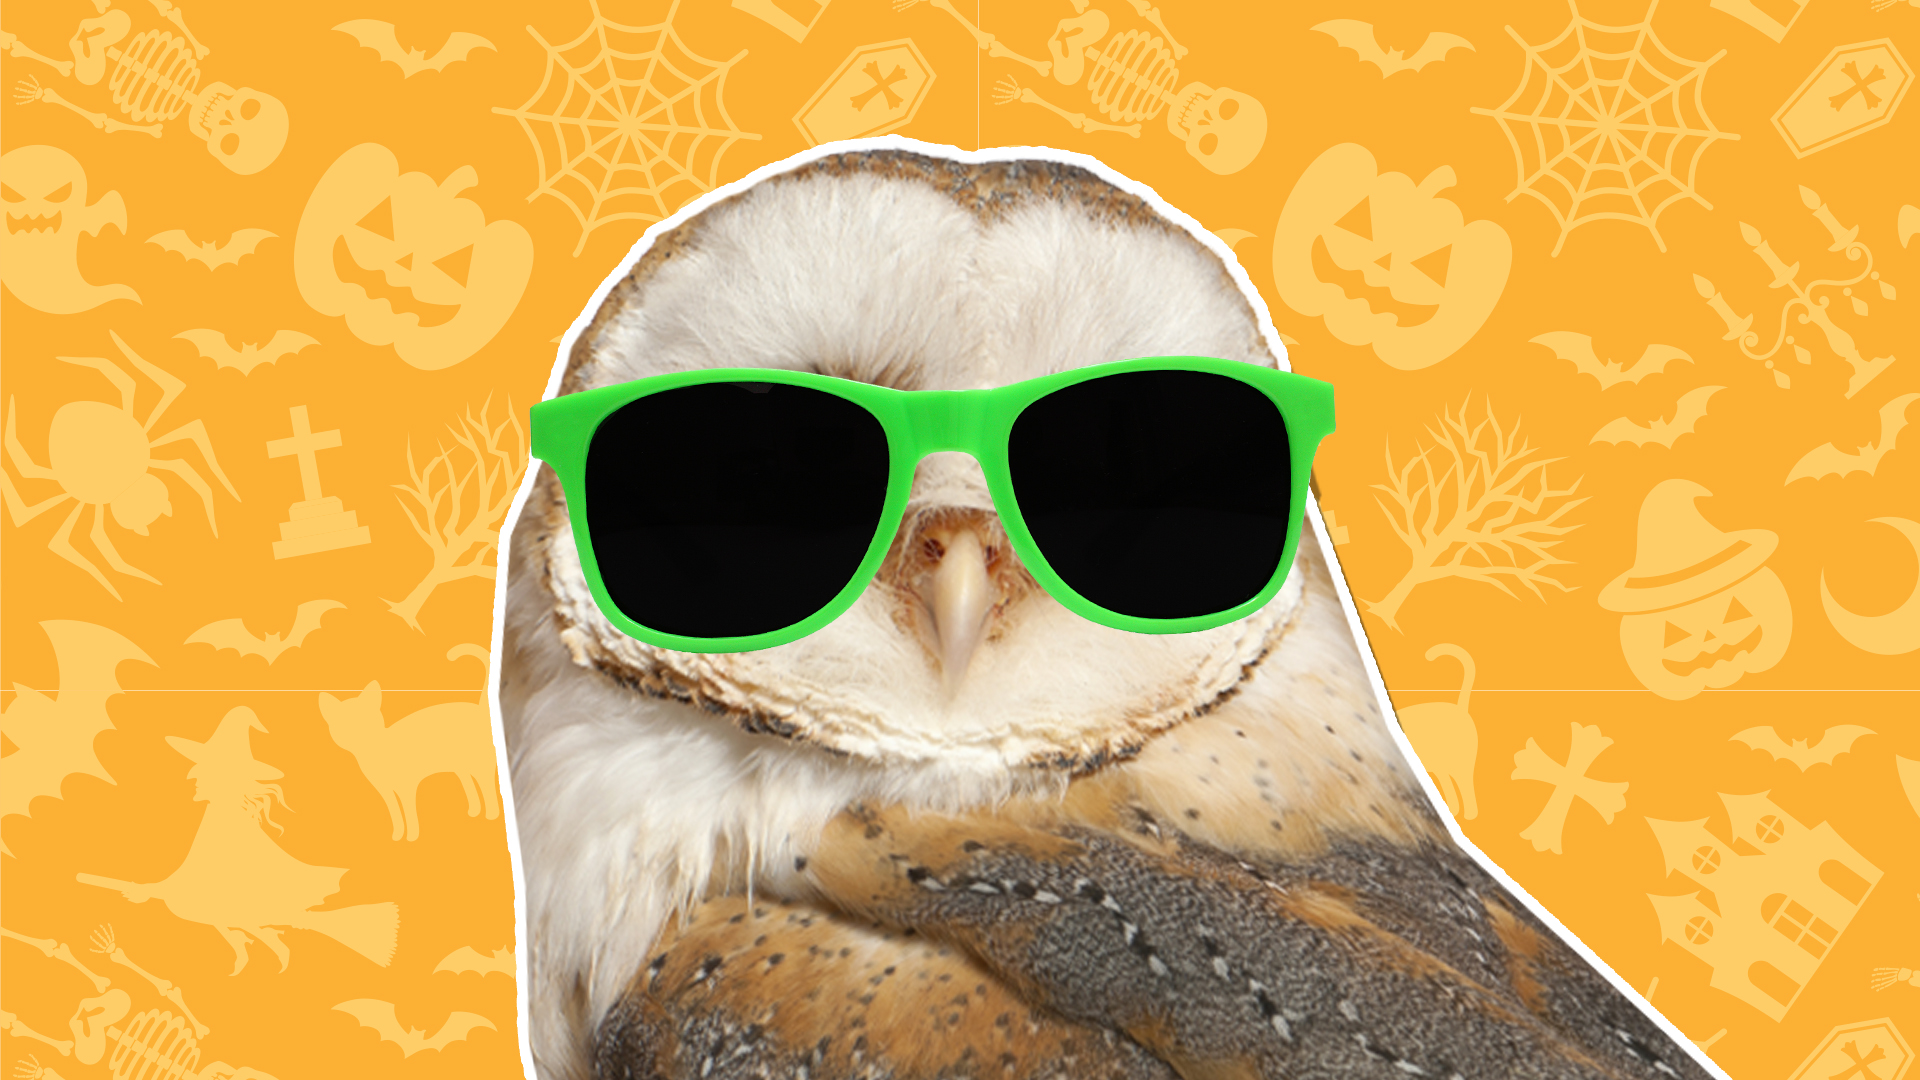 A brown owl wearing green sunglasses